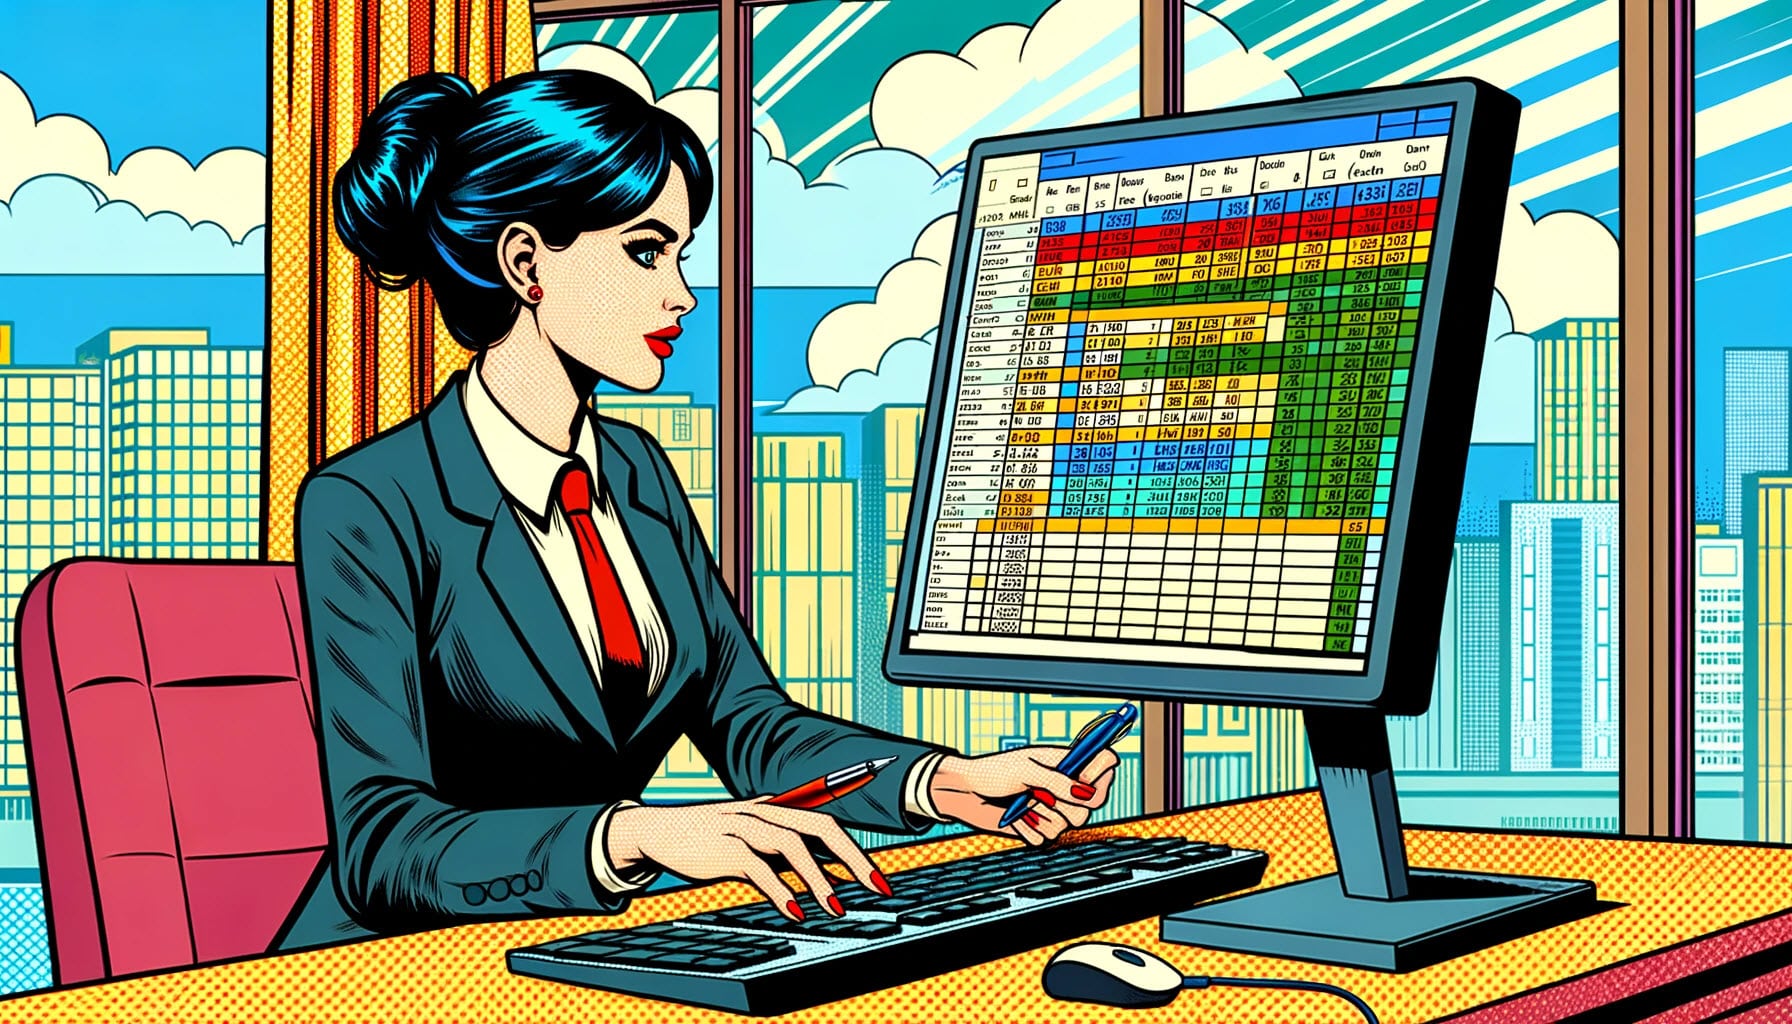 image features a female person in a business environment, actively engaged in modifying Excel worksheets. The scene captures her proficiency and enjoyment in tasks like inserting and deleting rows, merging cells, and organizing data, all in a vibrant, comic-style atmosphere suitable for a professional setting.